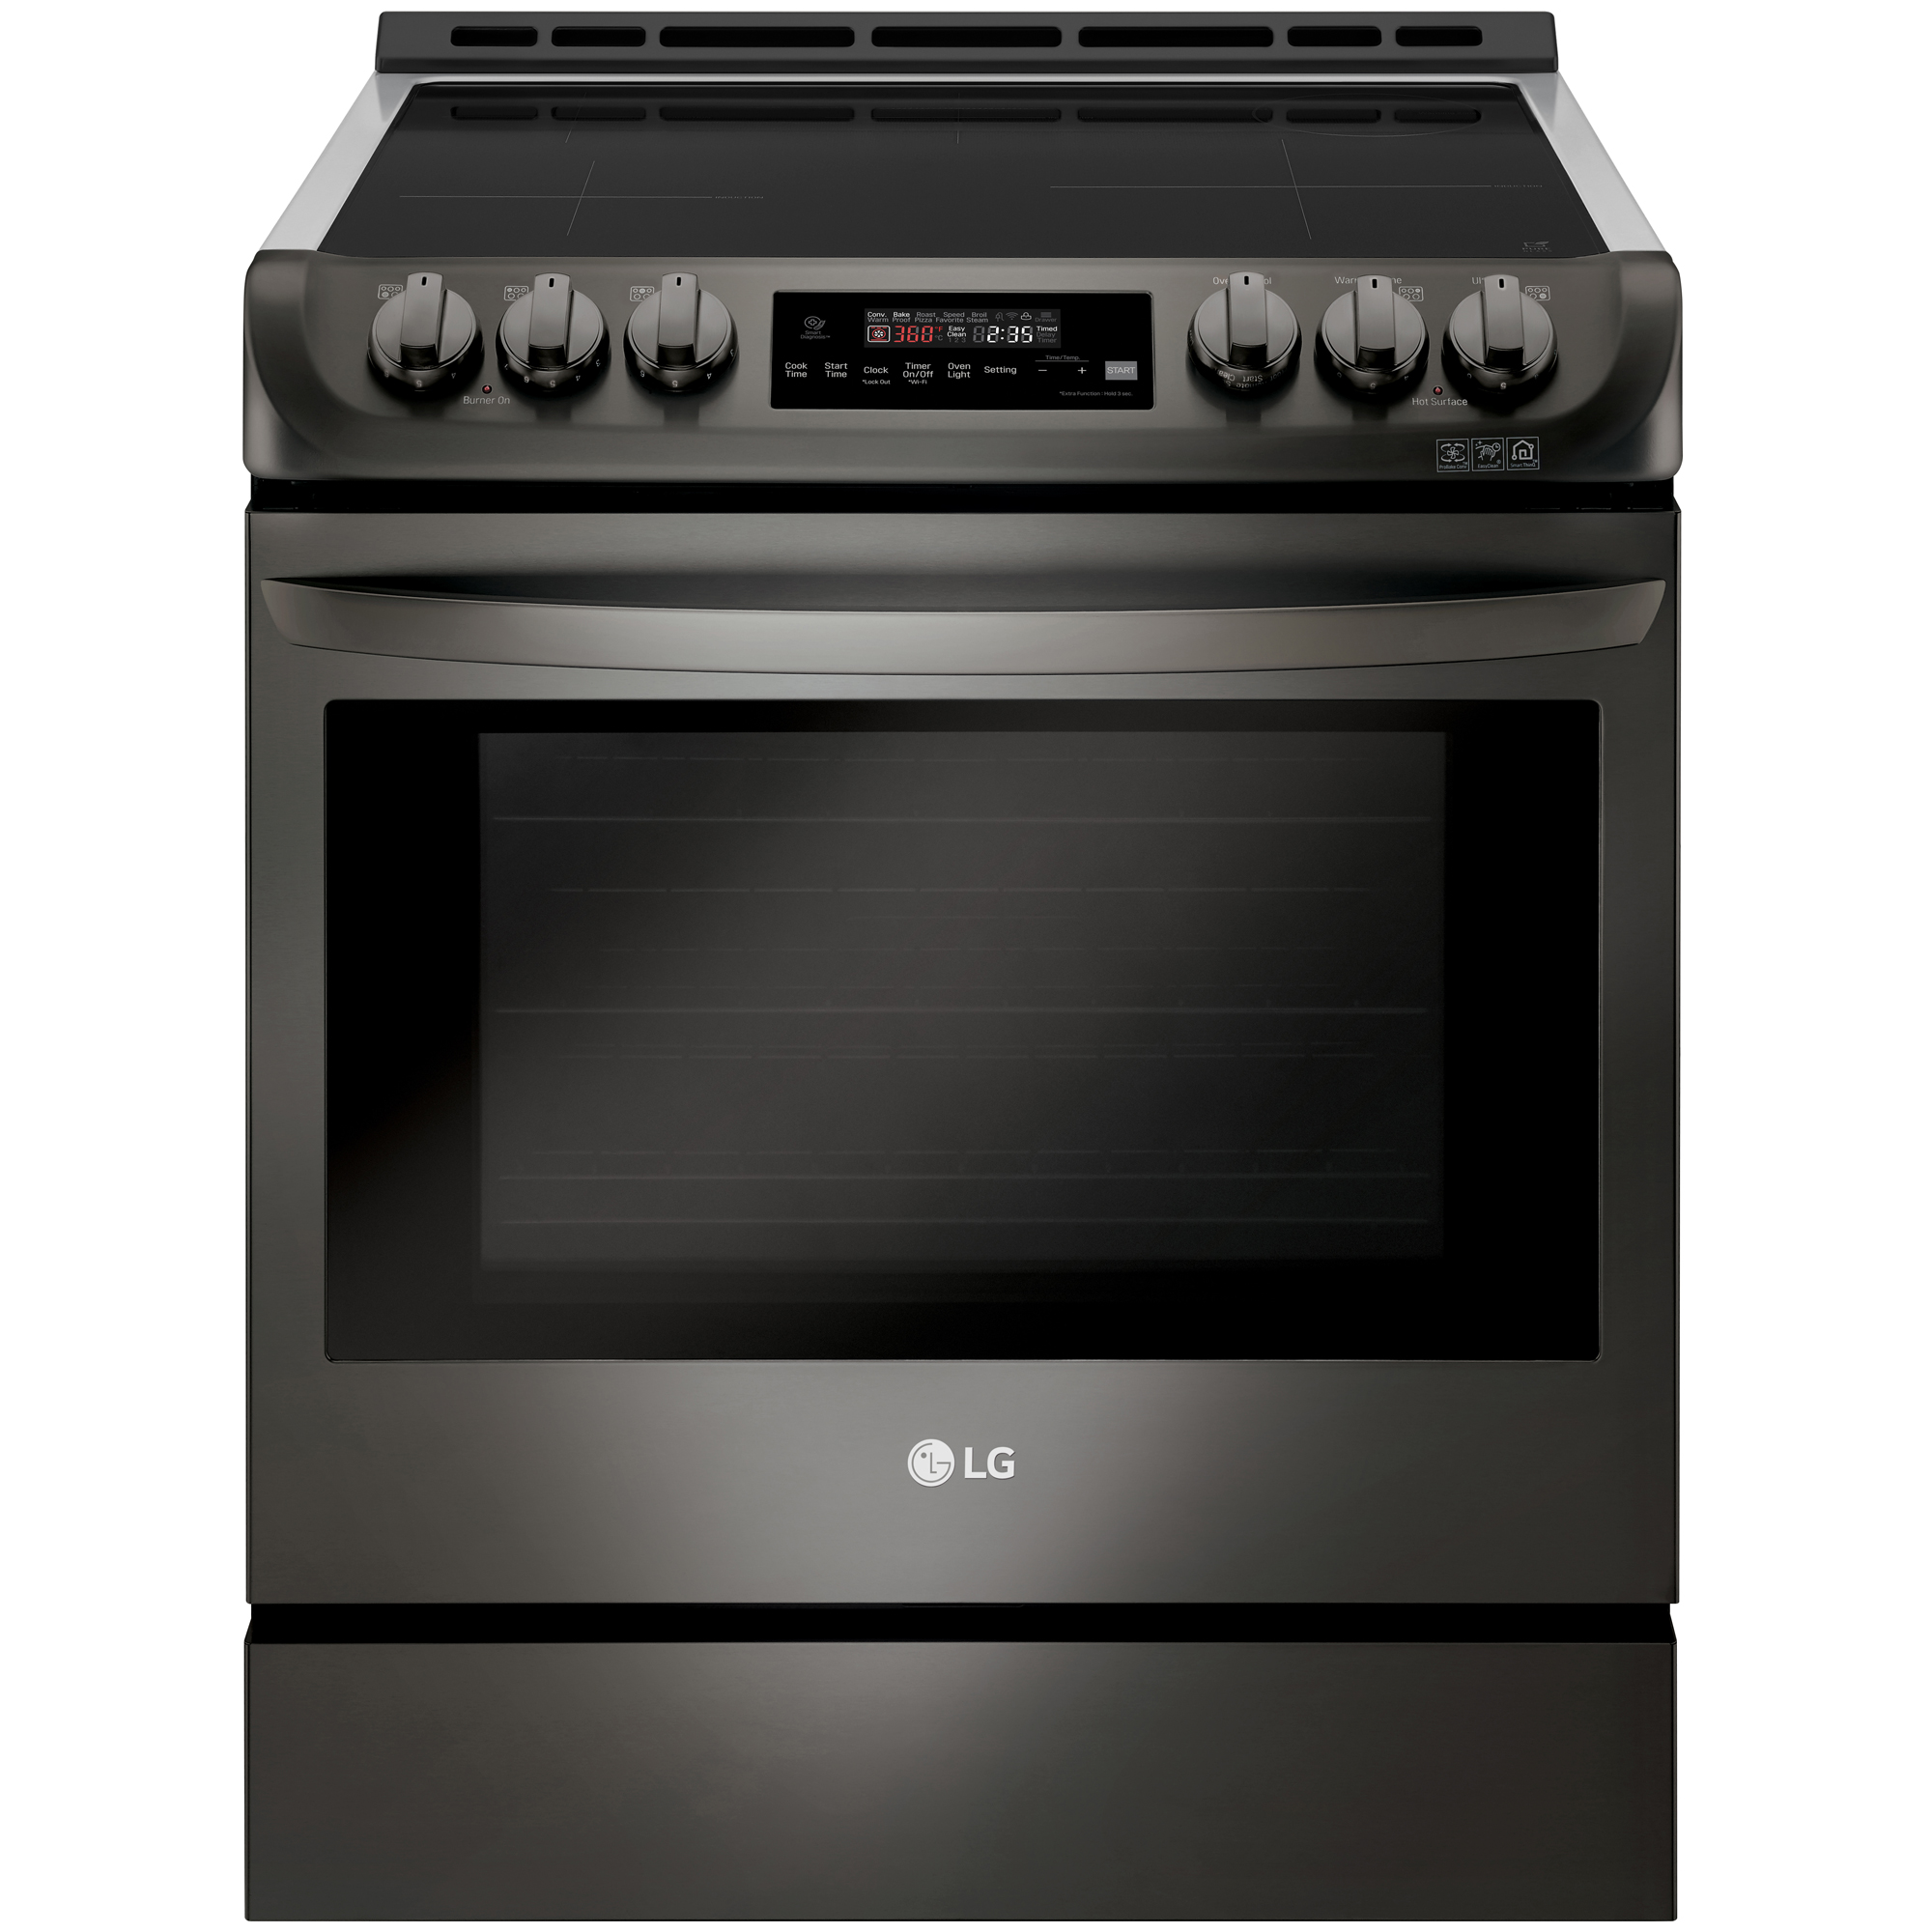 LG LSE4616BD 30" Slide-In Electric Range w/ ProBake Convection - Black Lg Black Stainless Steel Electric Stove